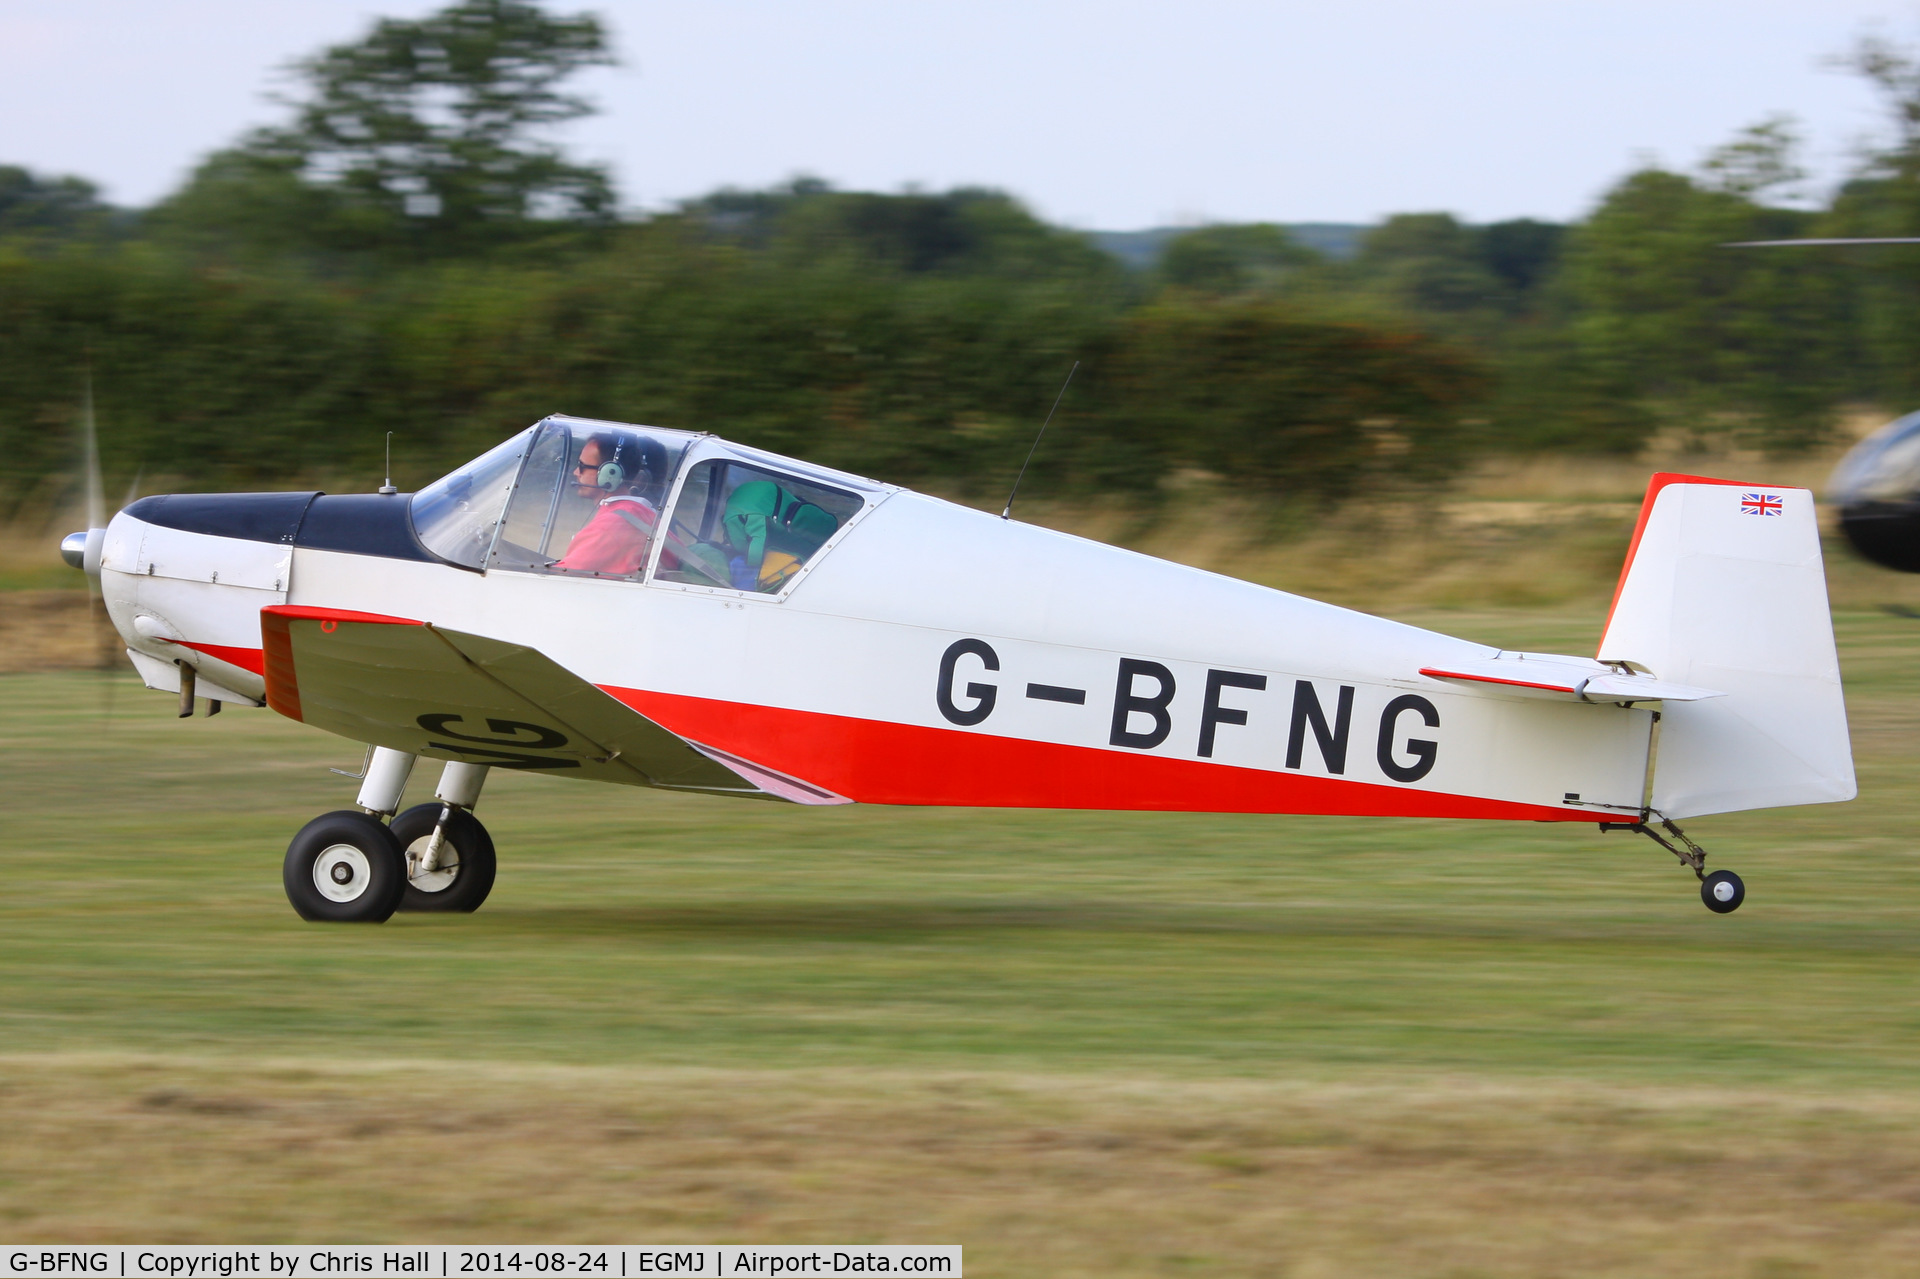 G-BFNG, 1966 Jodel D-112 C/N 1321, at the Little Gransden Airshow 2014